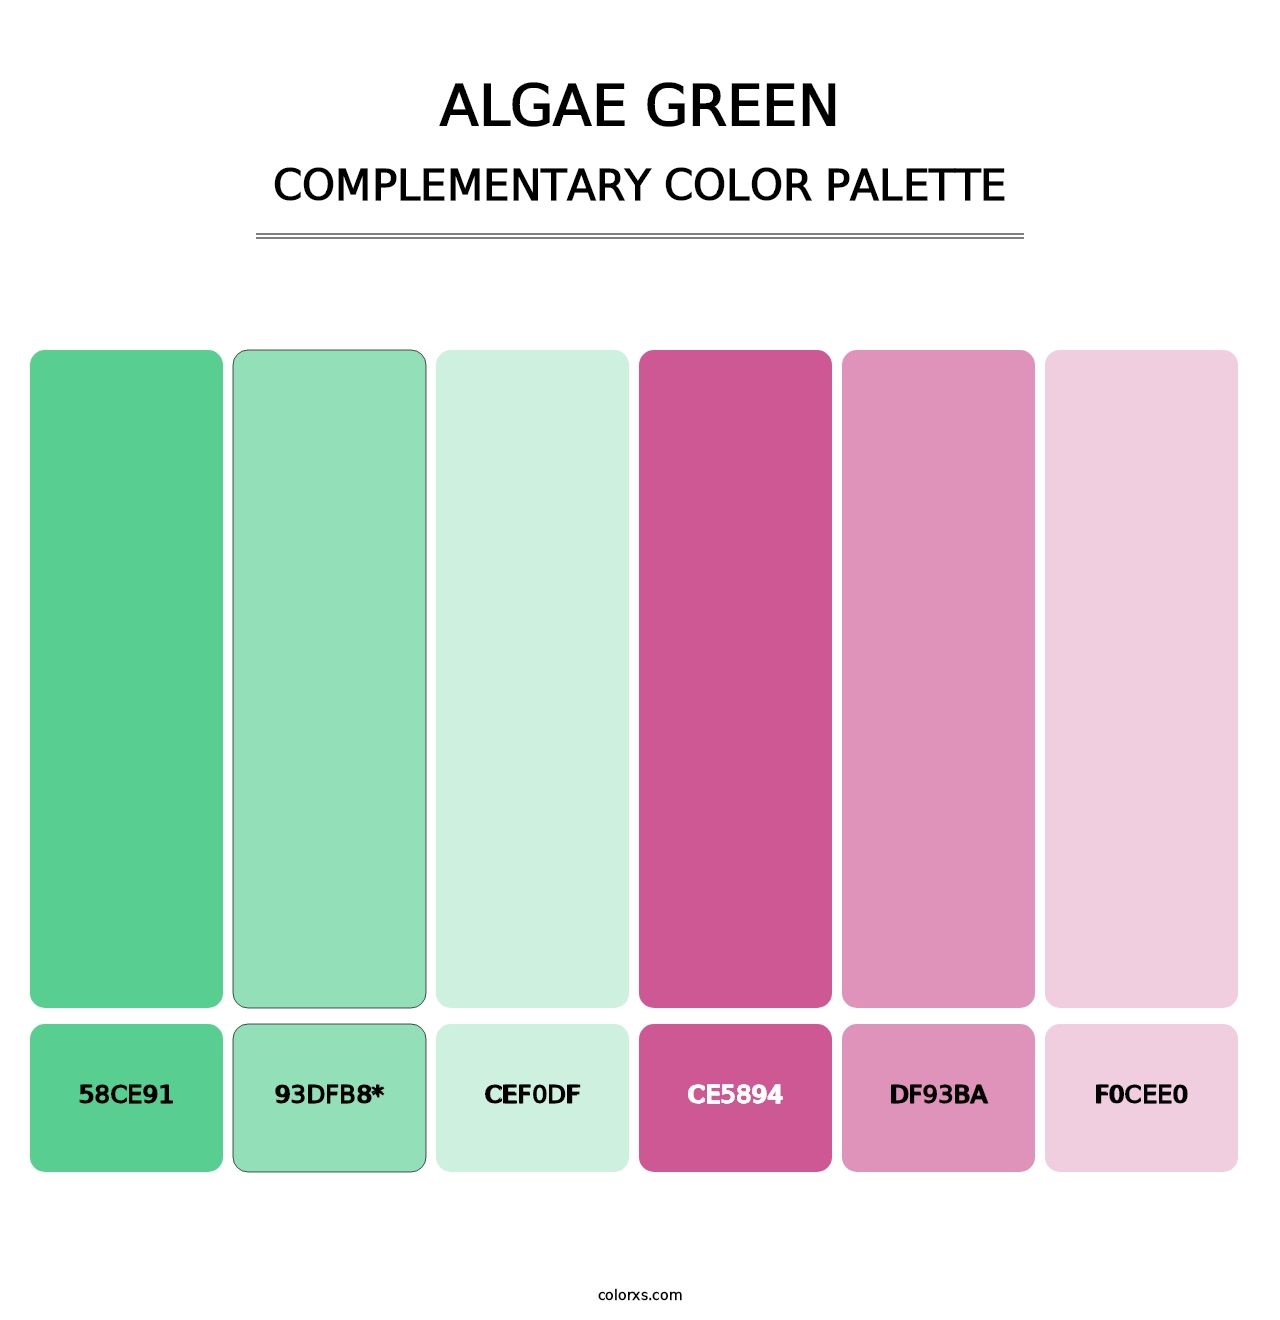 Algae Green - Complementary Color Palette